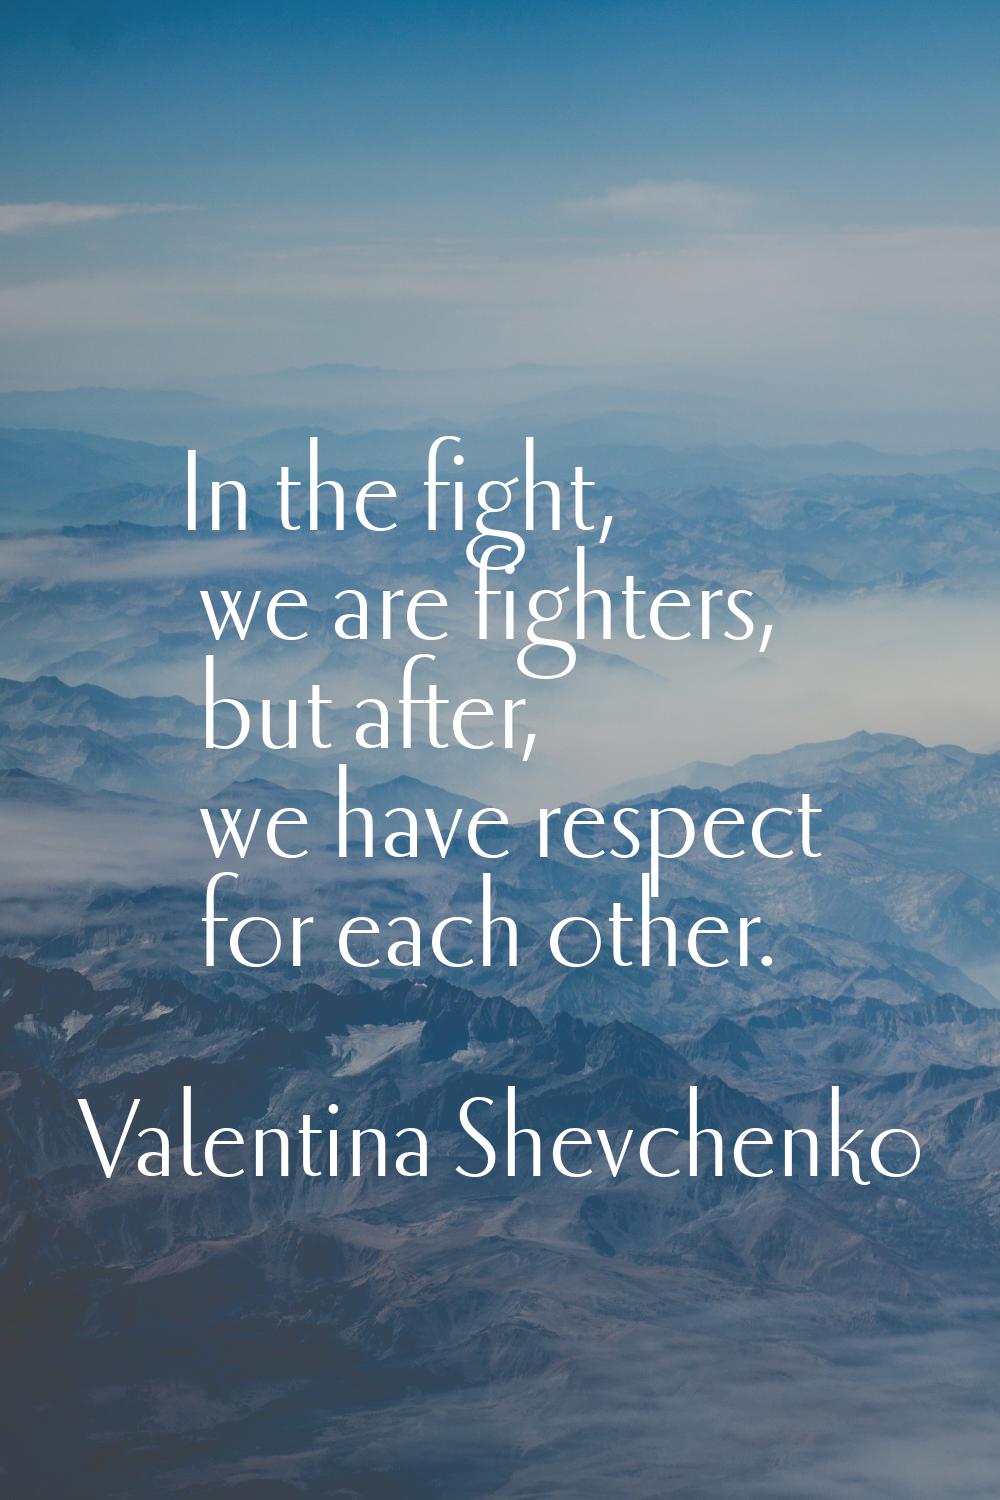 In the fight, we are fighters, but after, we have respect for each other.